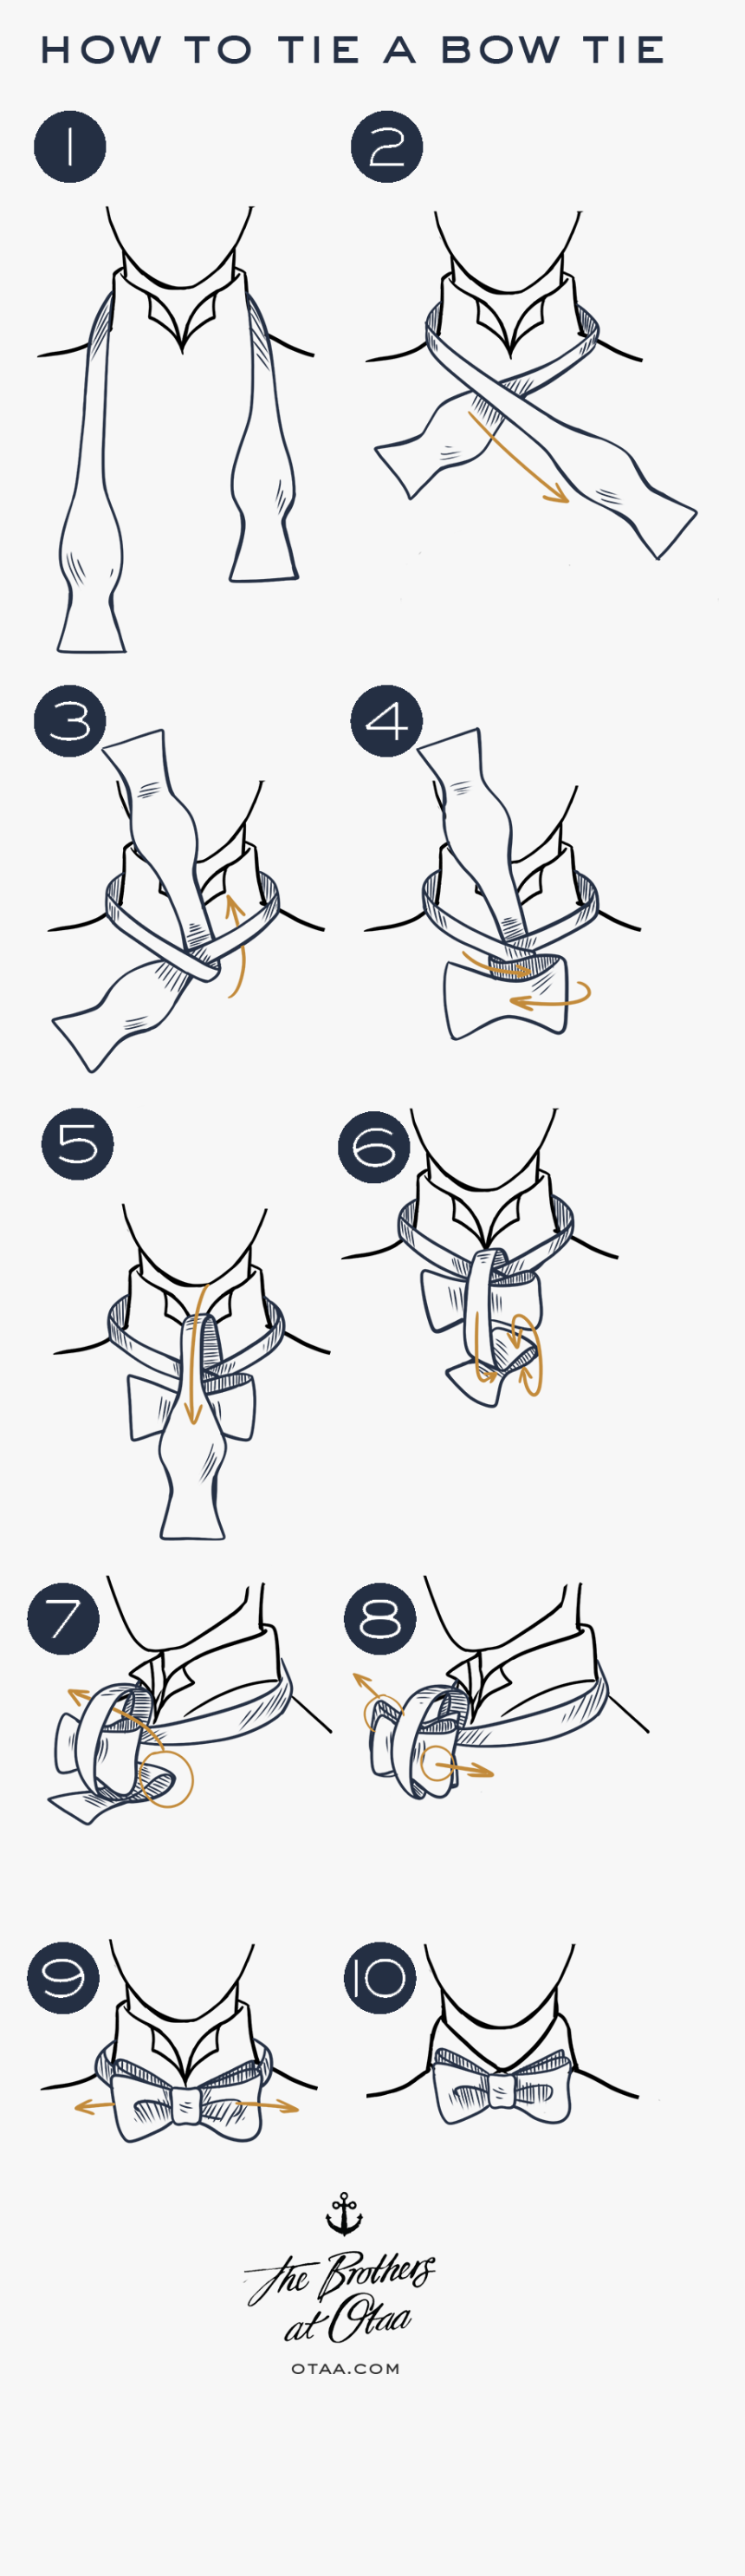 How To Tie A Bow Tie - Necktie, HD Png Download, Free Download